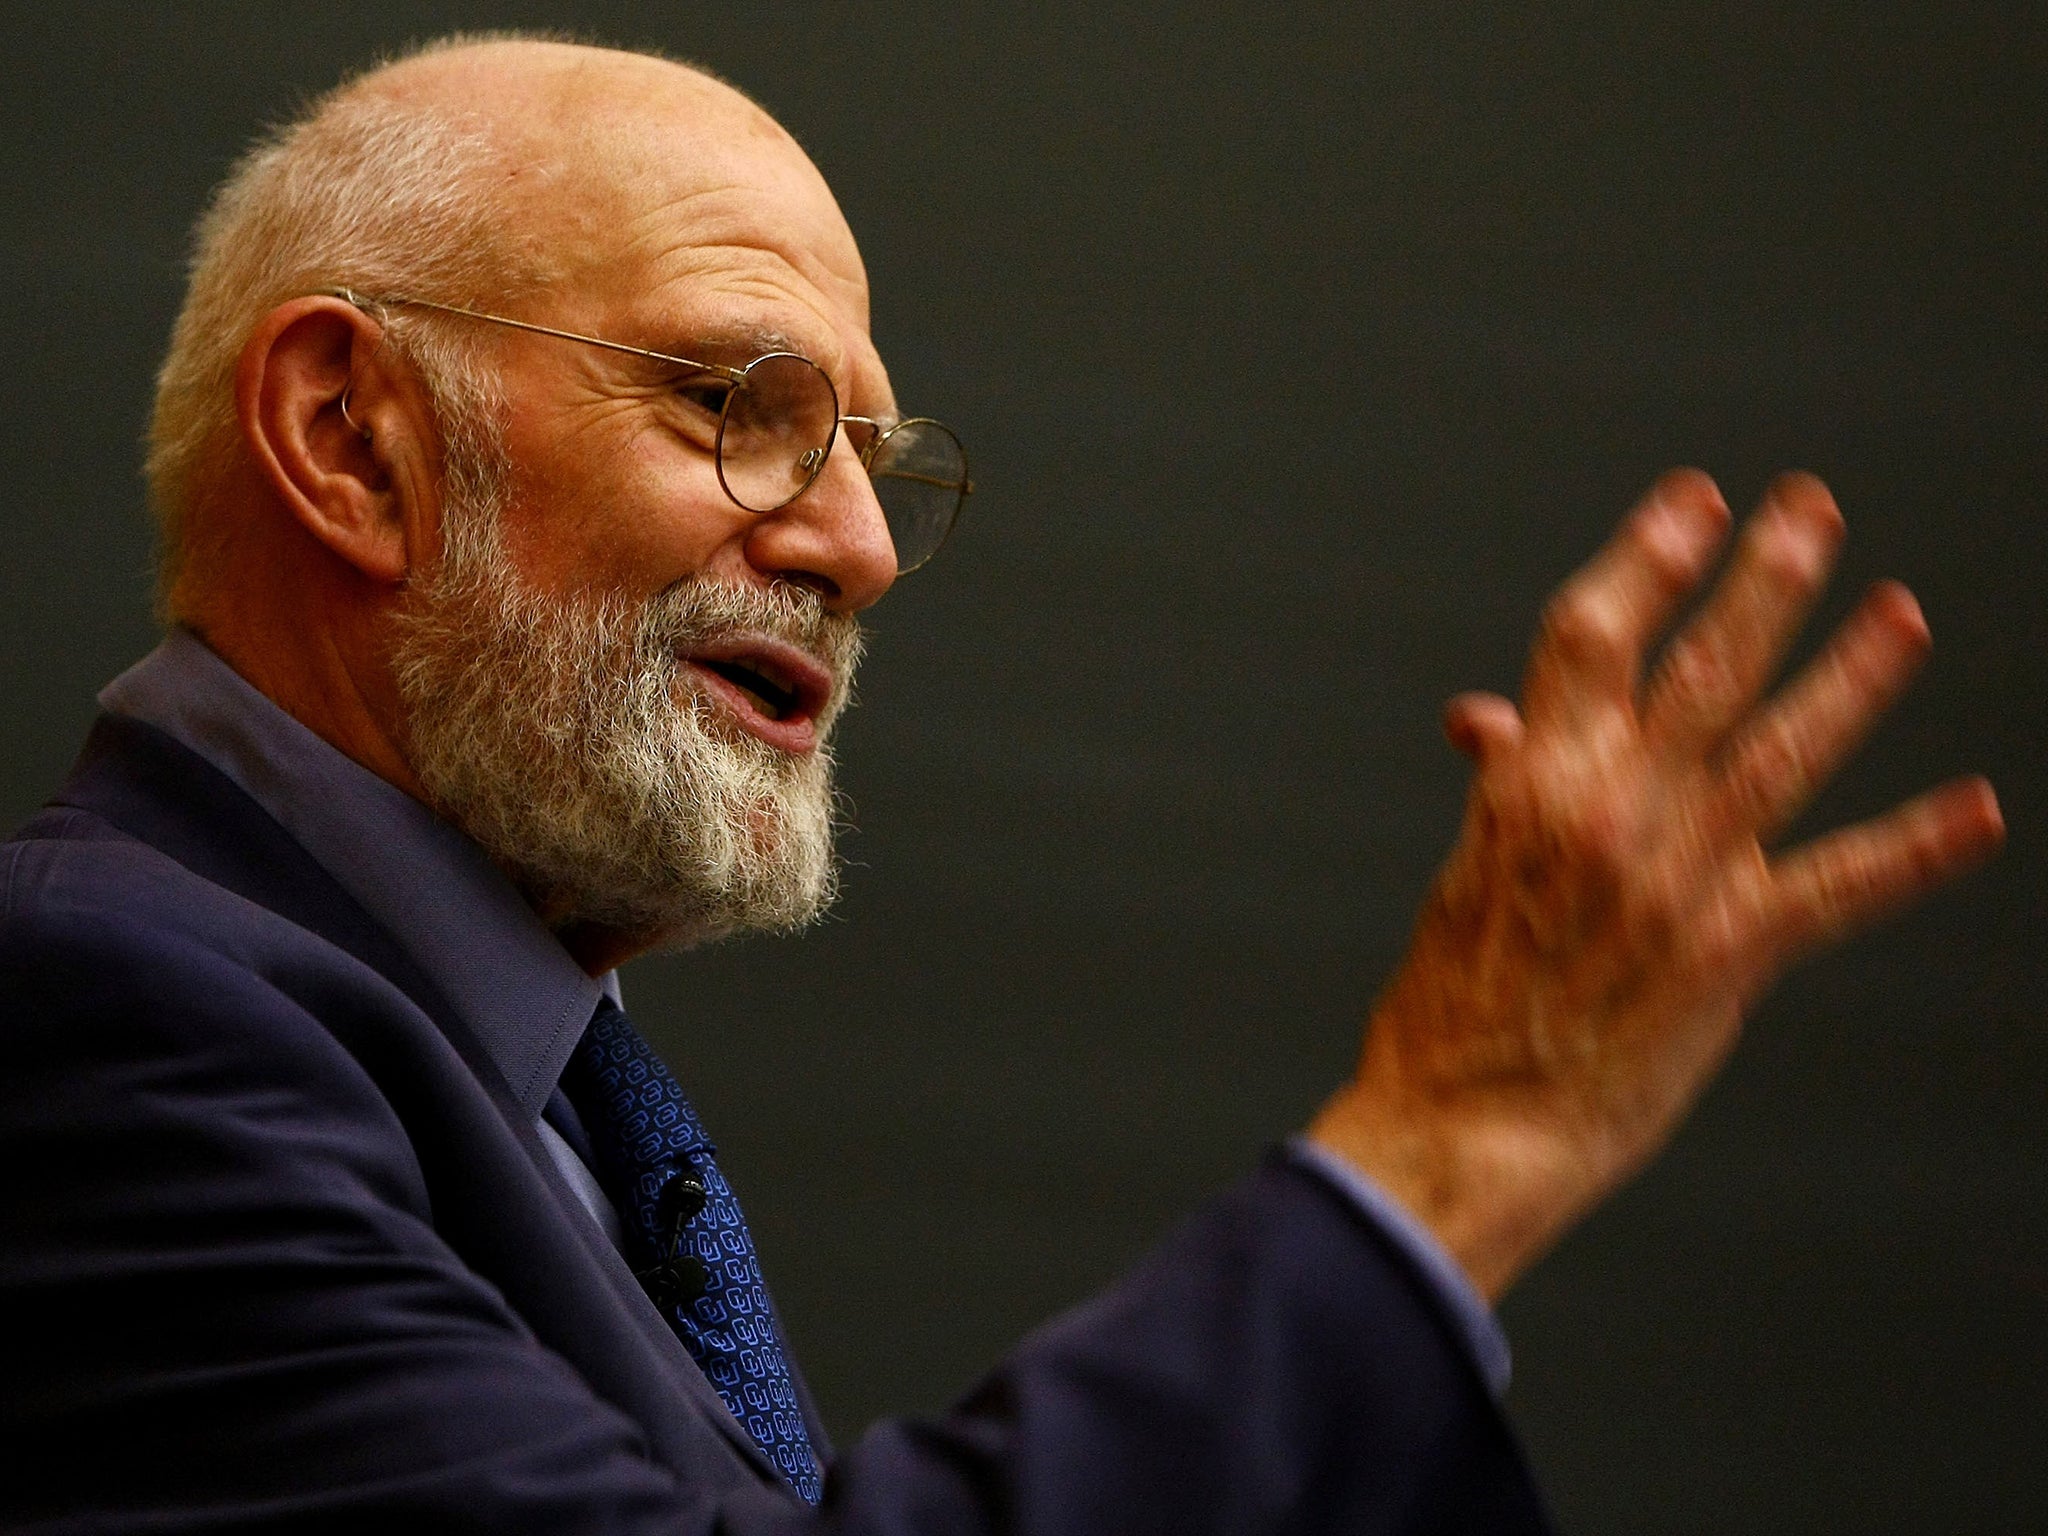 Oliver Sacks said his life has been 'an enormous privilege and adventure', The Independent